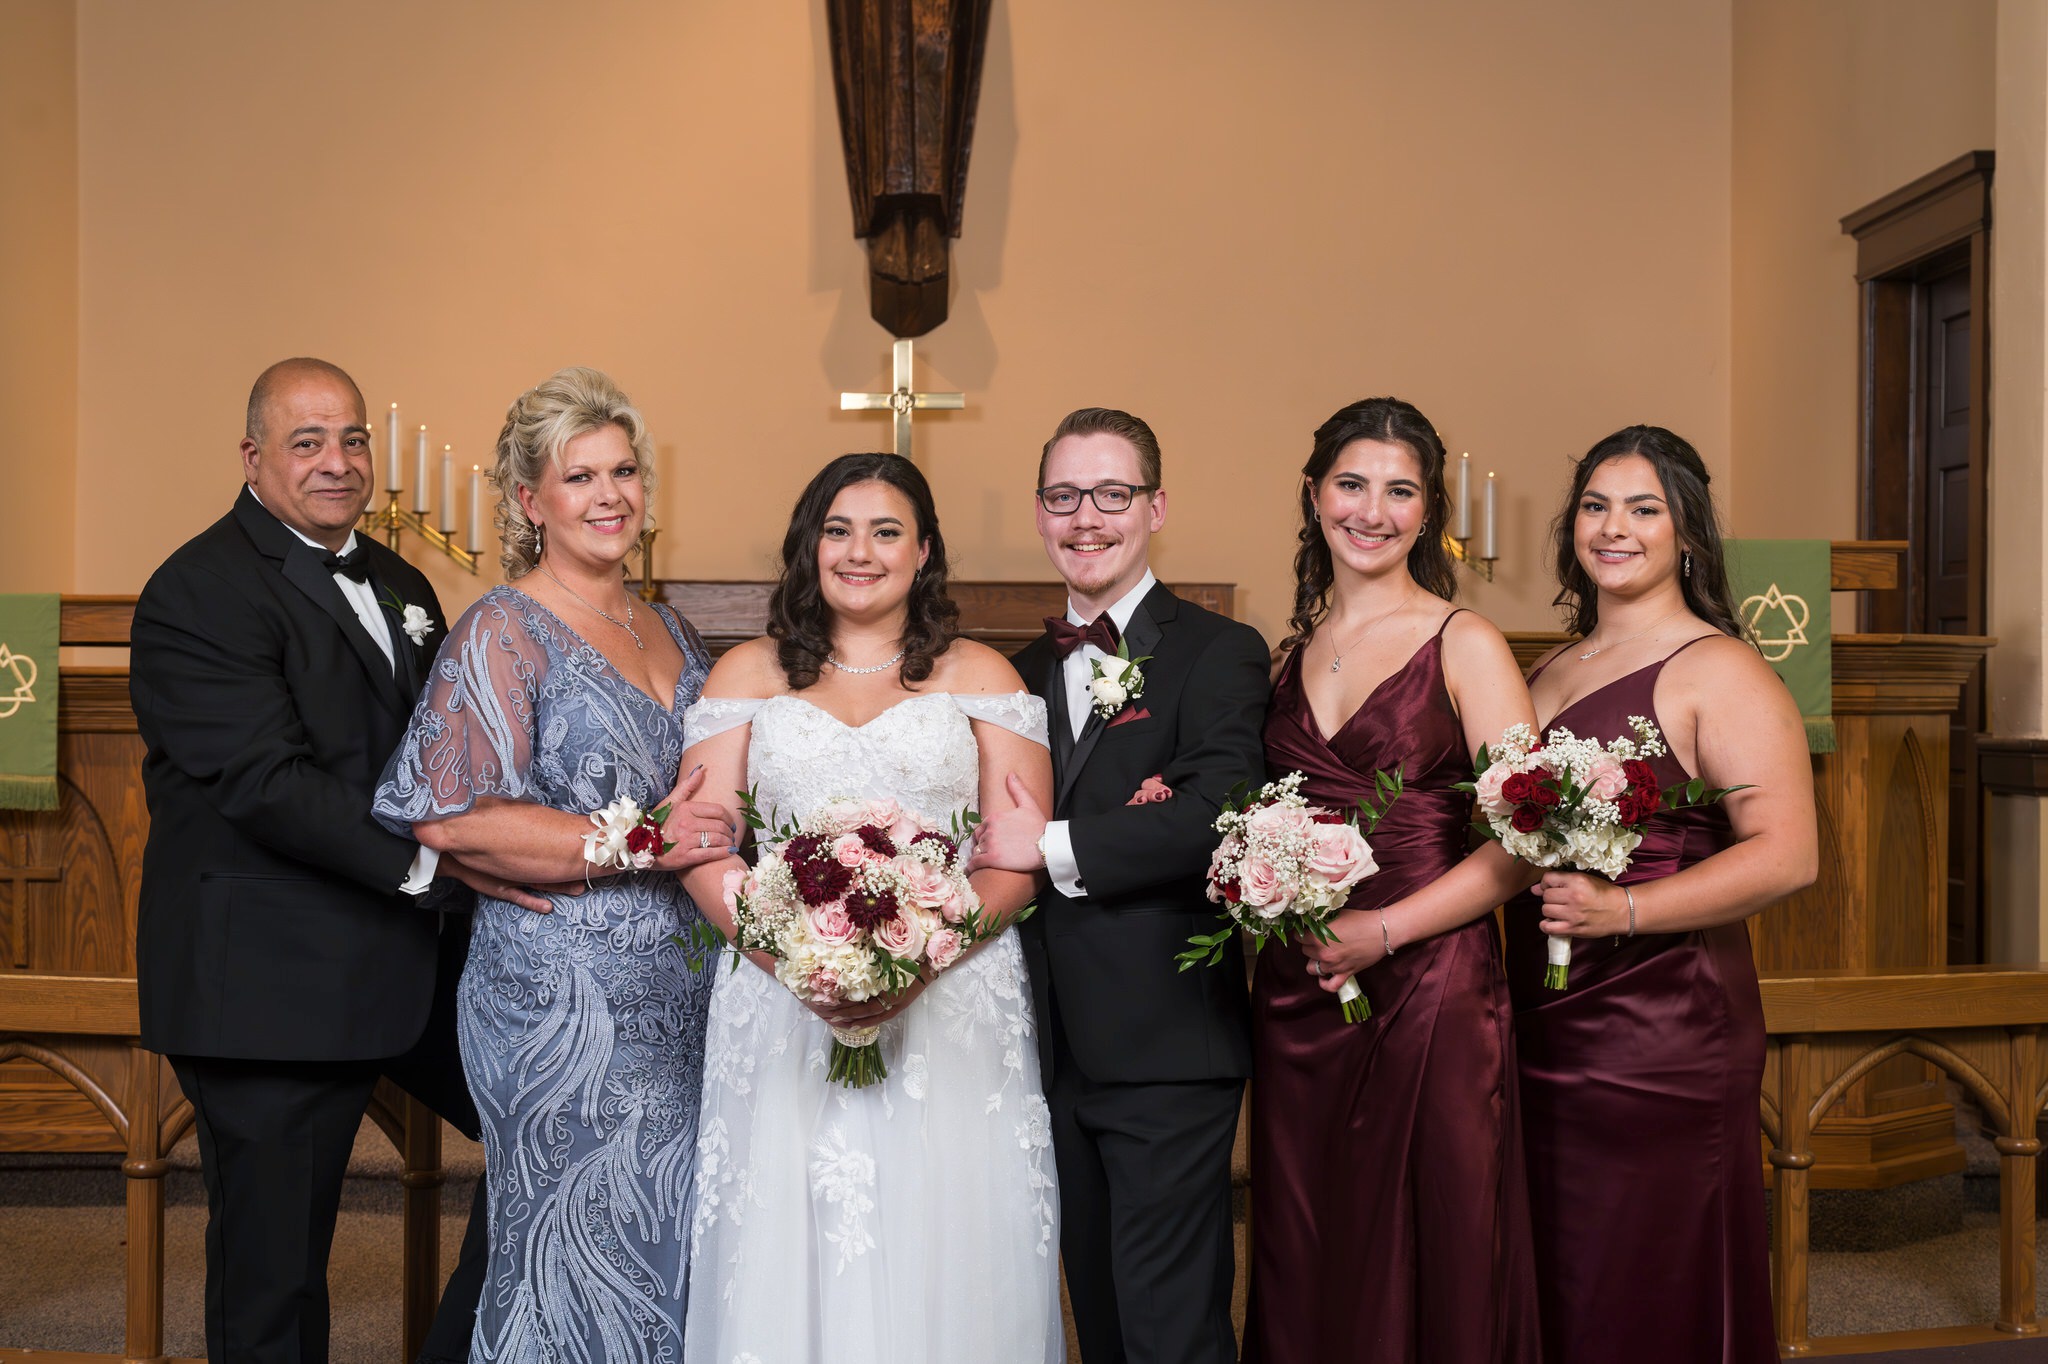 A family portrait on a wedding day at Immanuel Lutheran Church in Macomb, MI. 